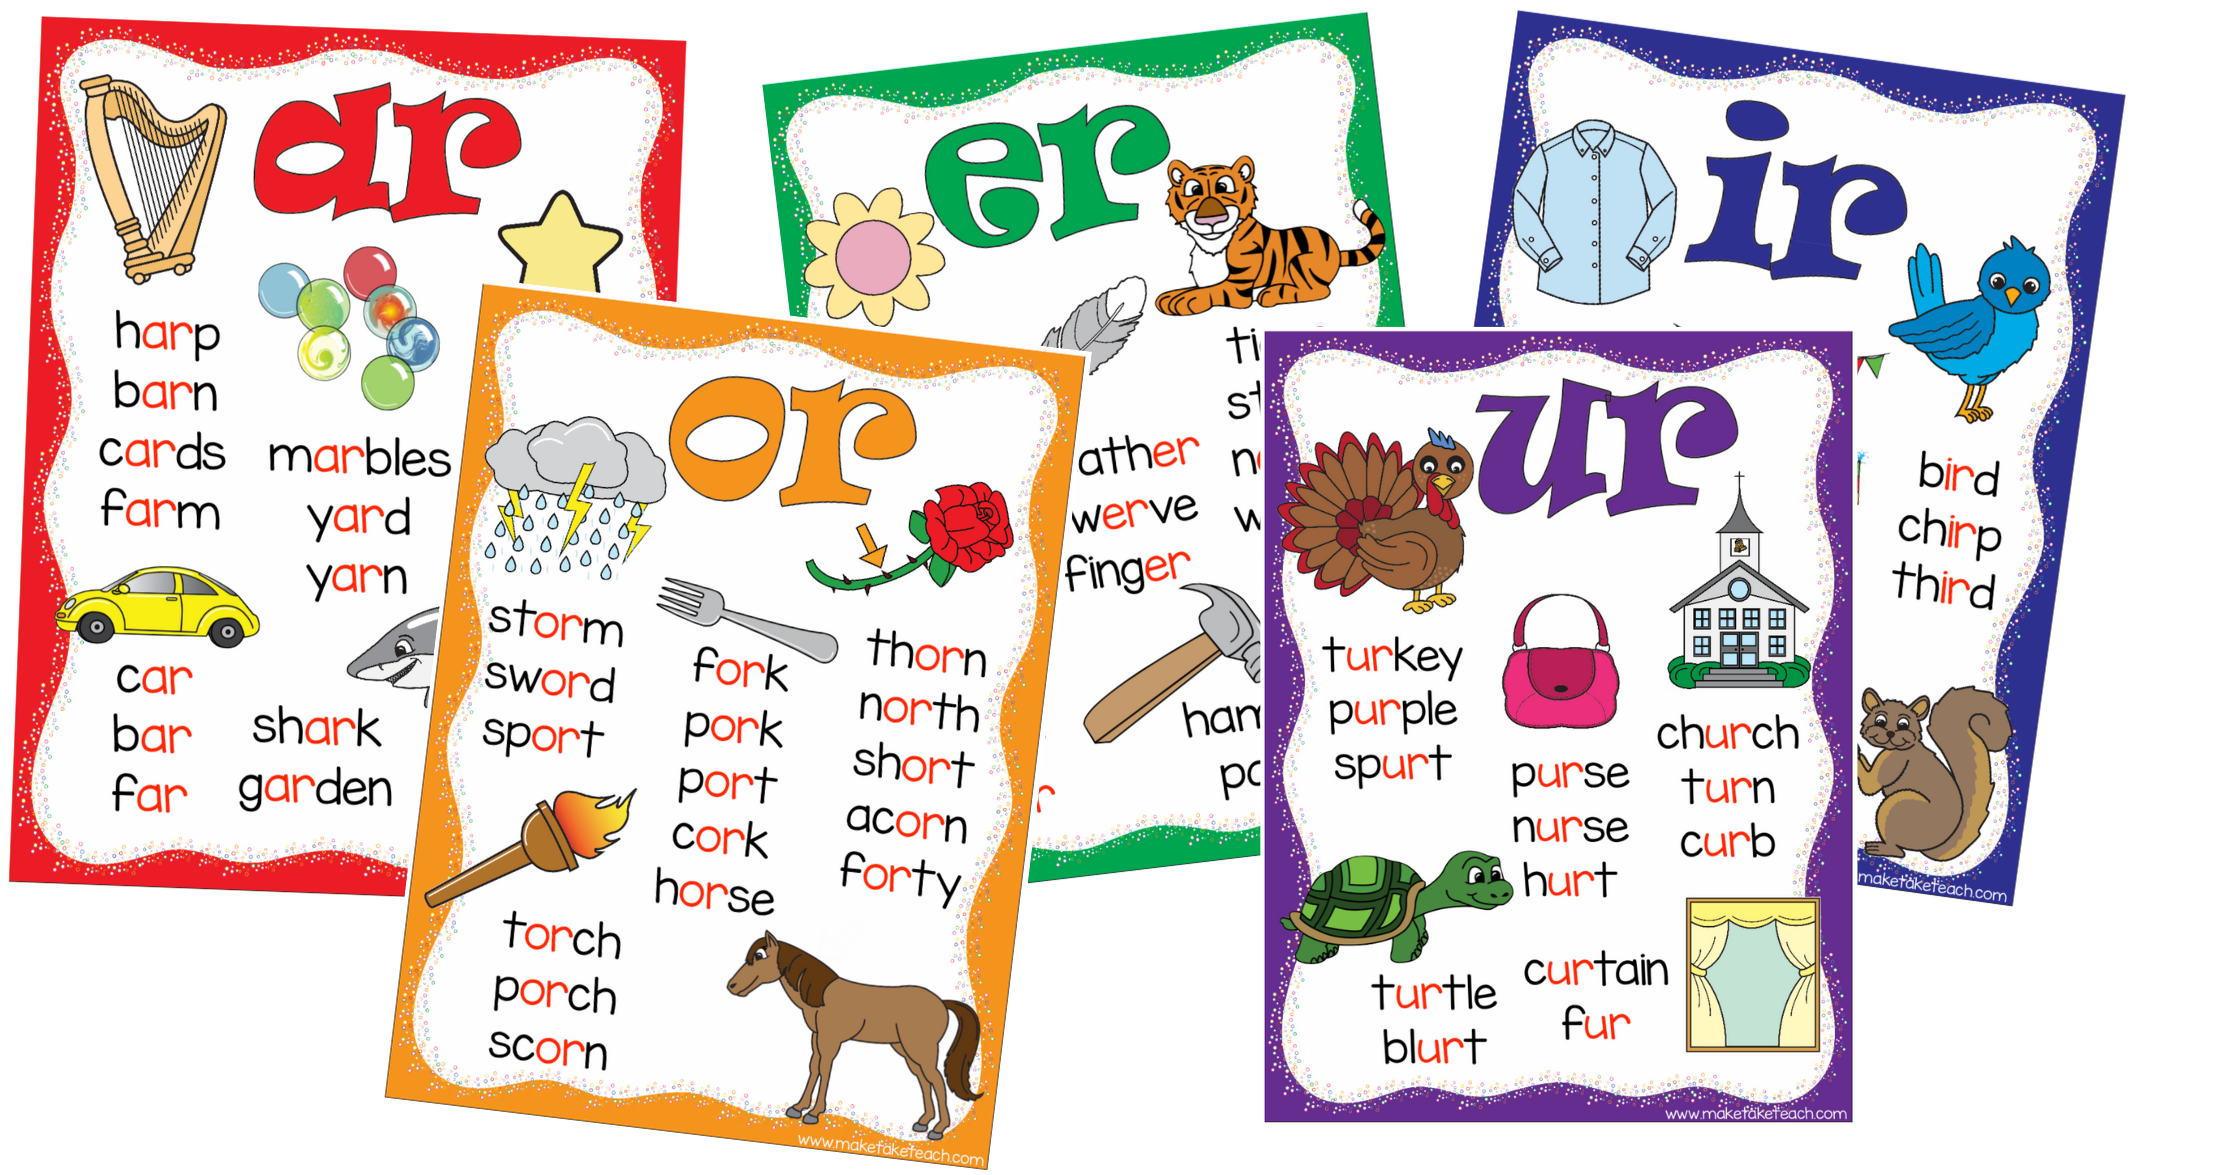 Free R Controlled Vowels Posters Phonics Posters Phon - vrogue.co